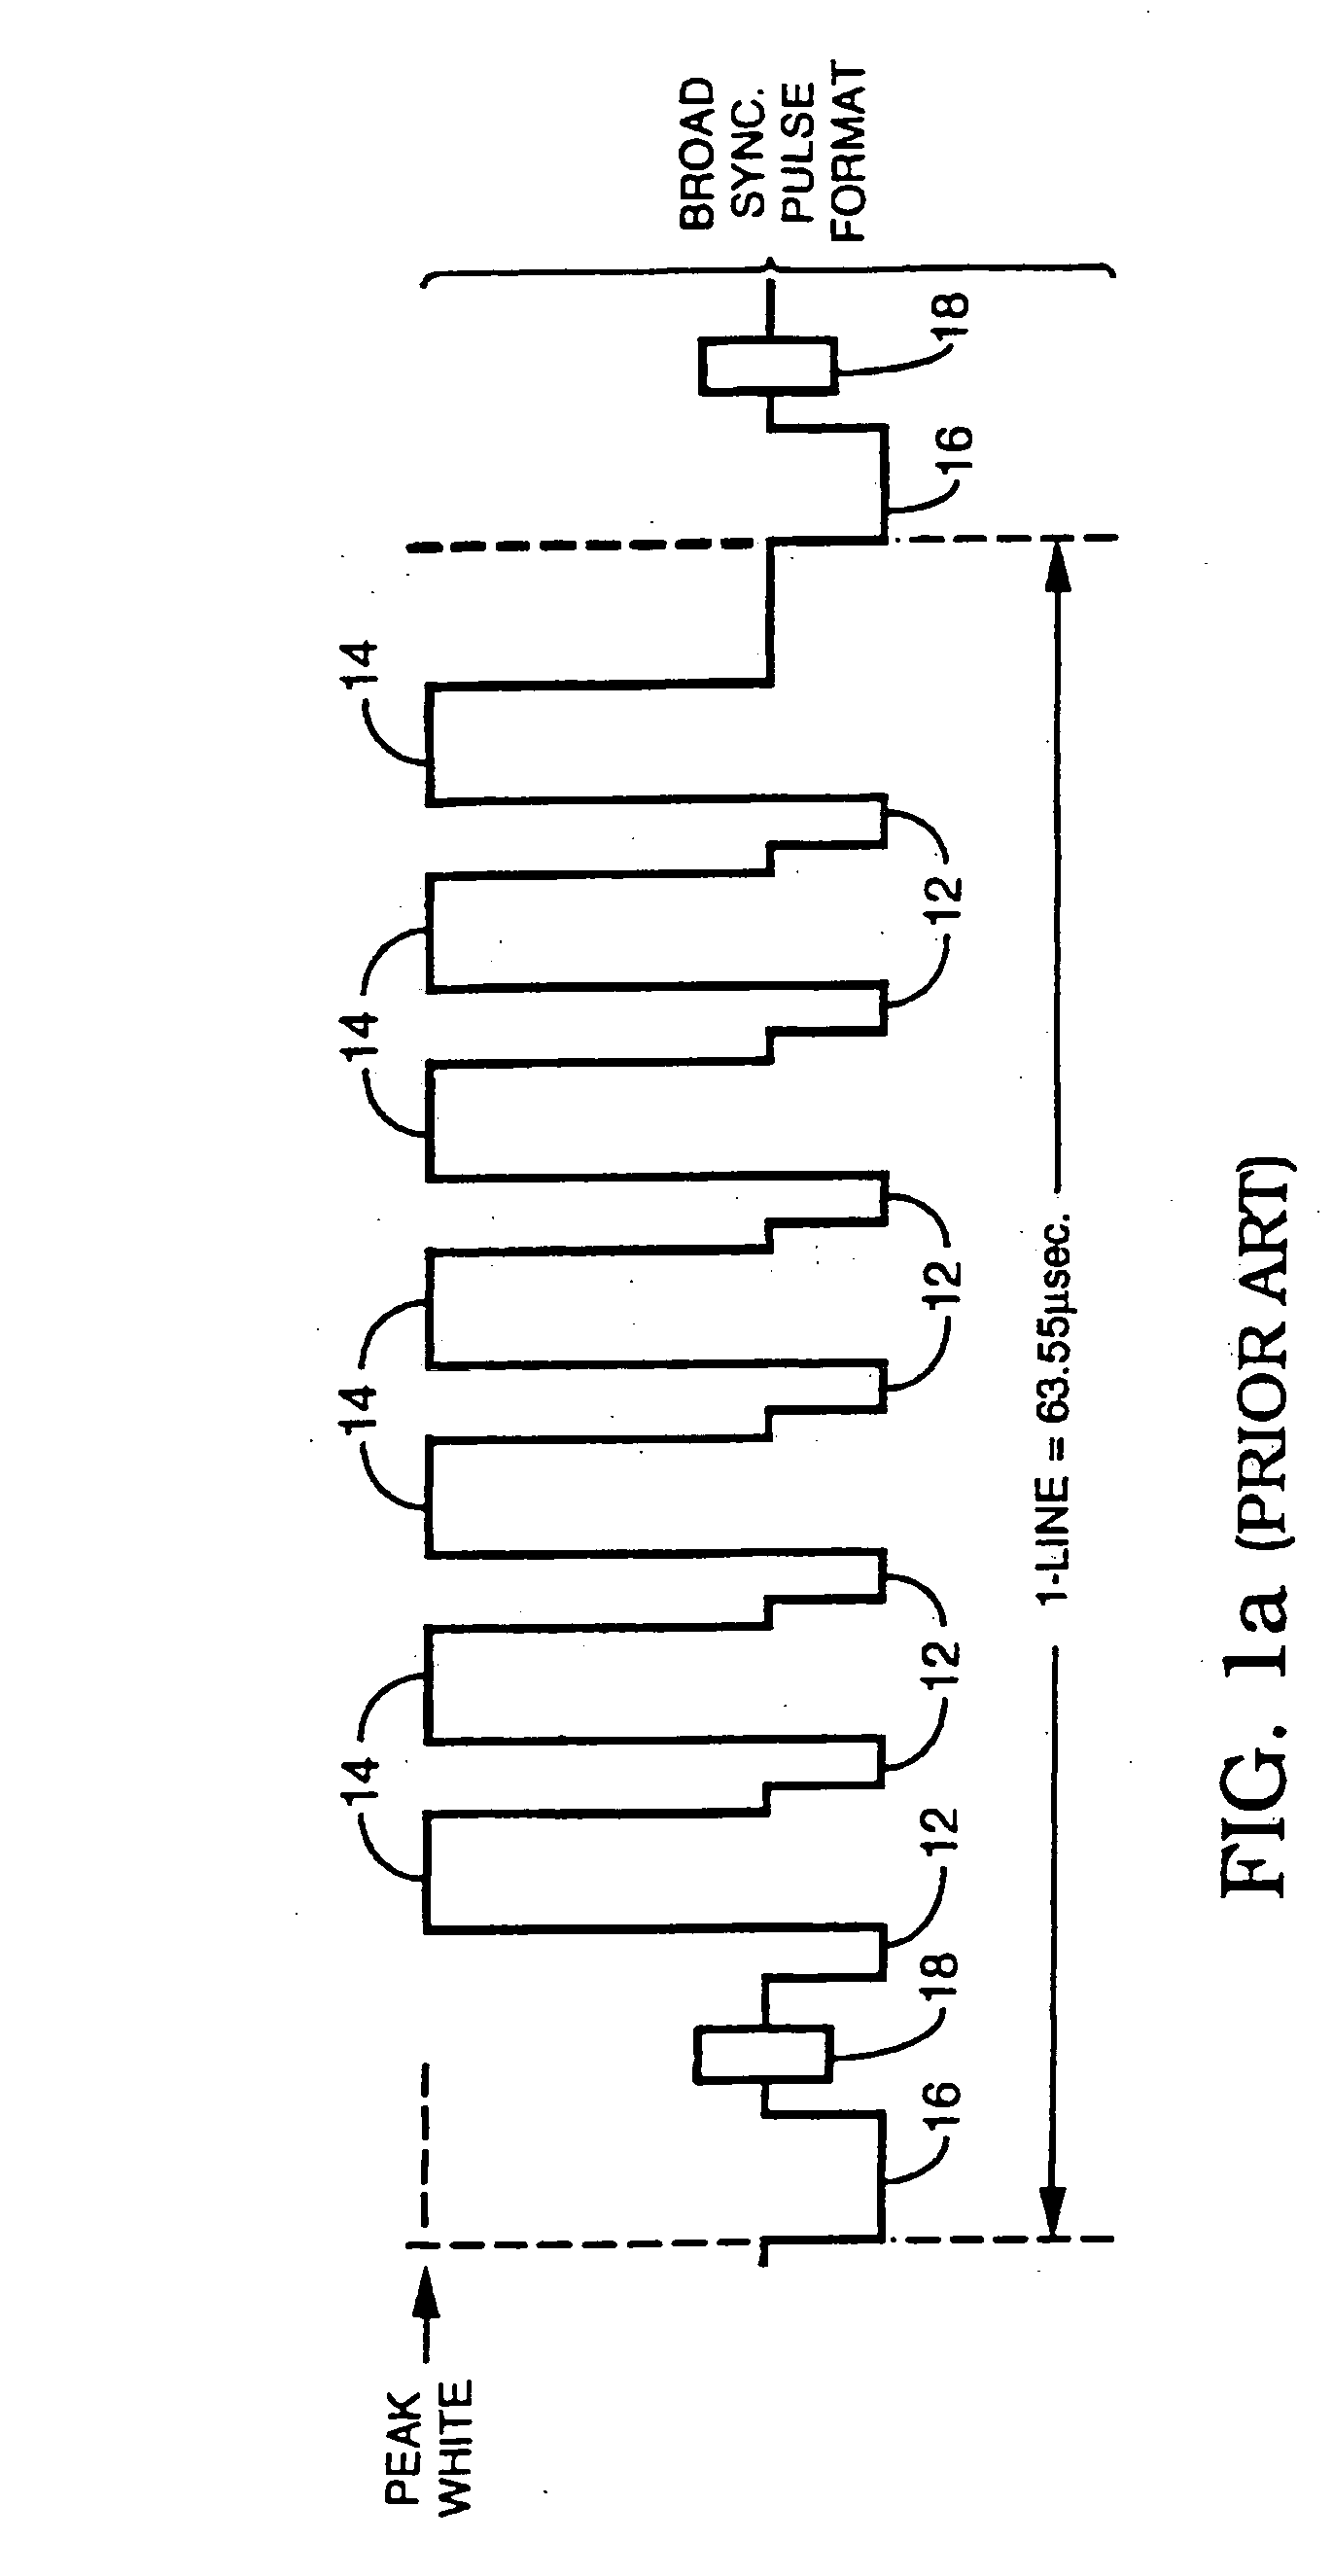 Method and apparatus to synthesize and defeat video copy protection signals